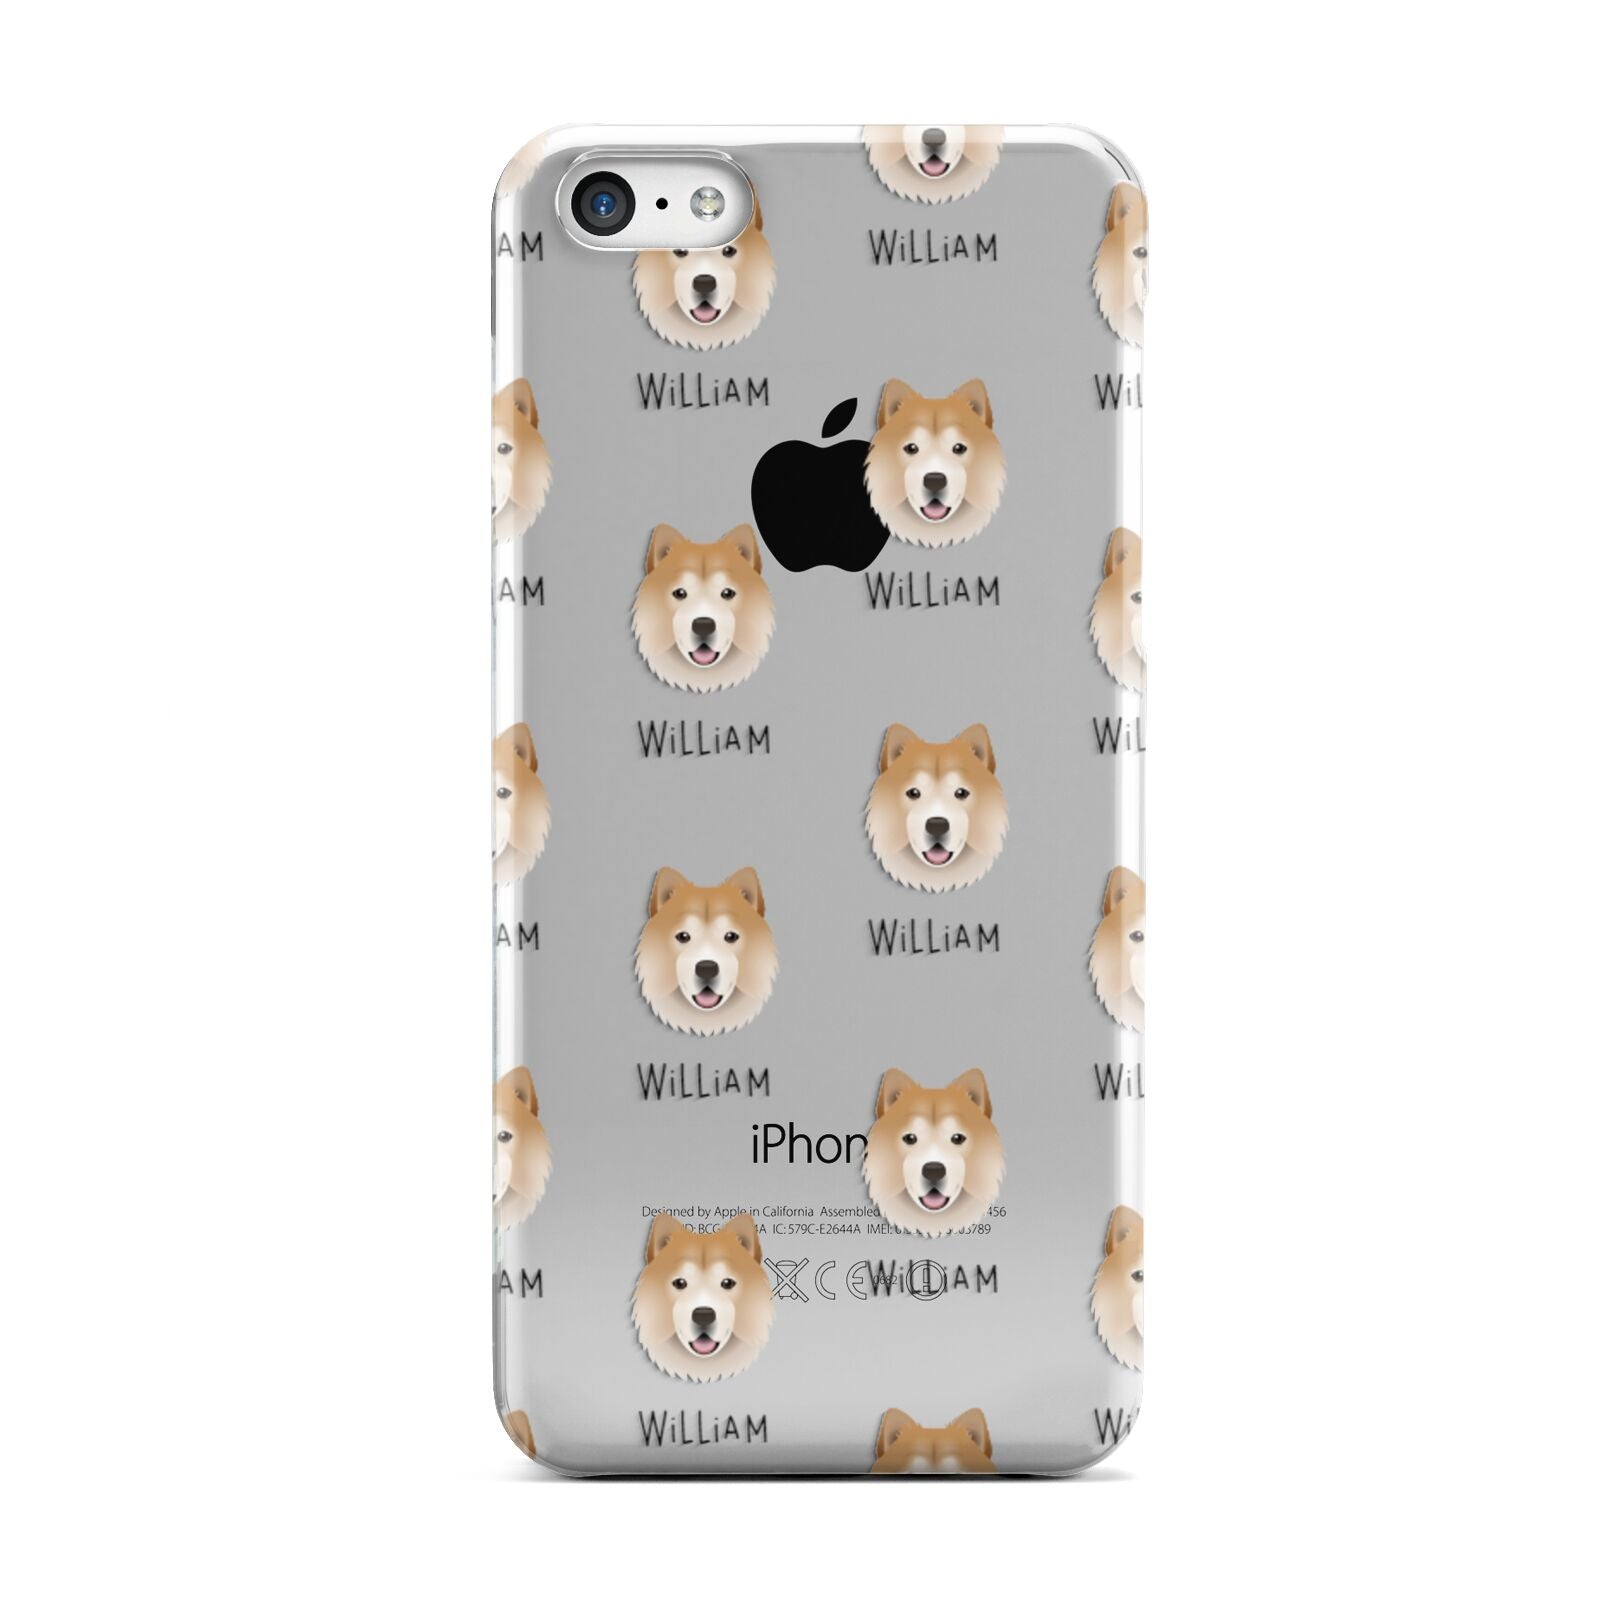 Chusky Icon with Name Apple iPhone 5c Case